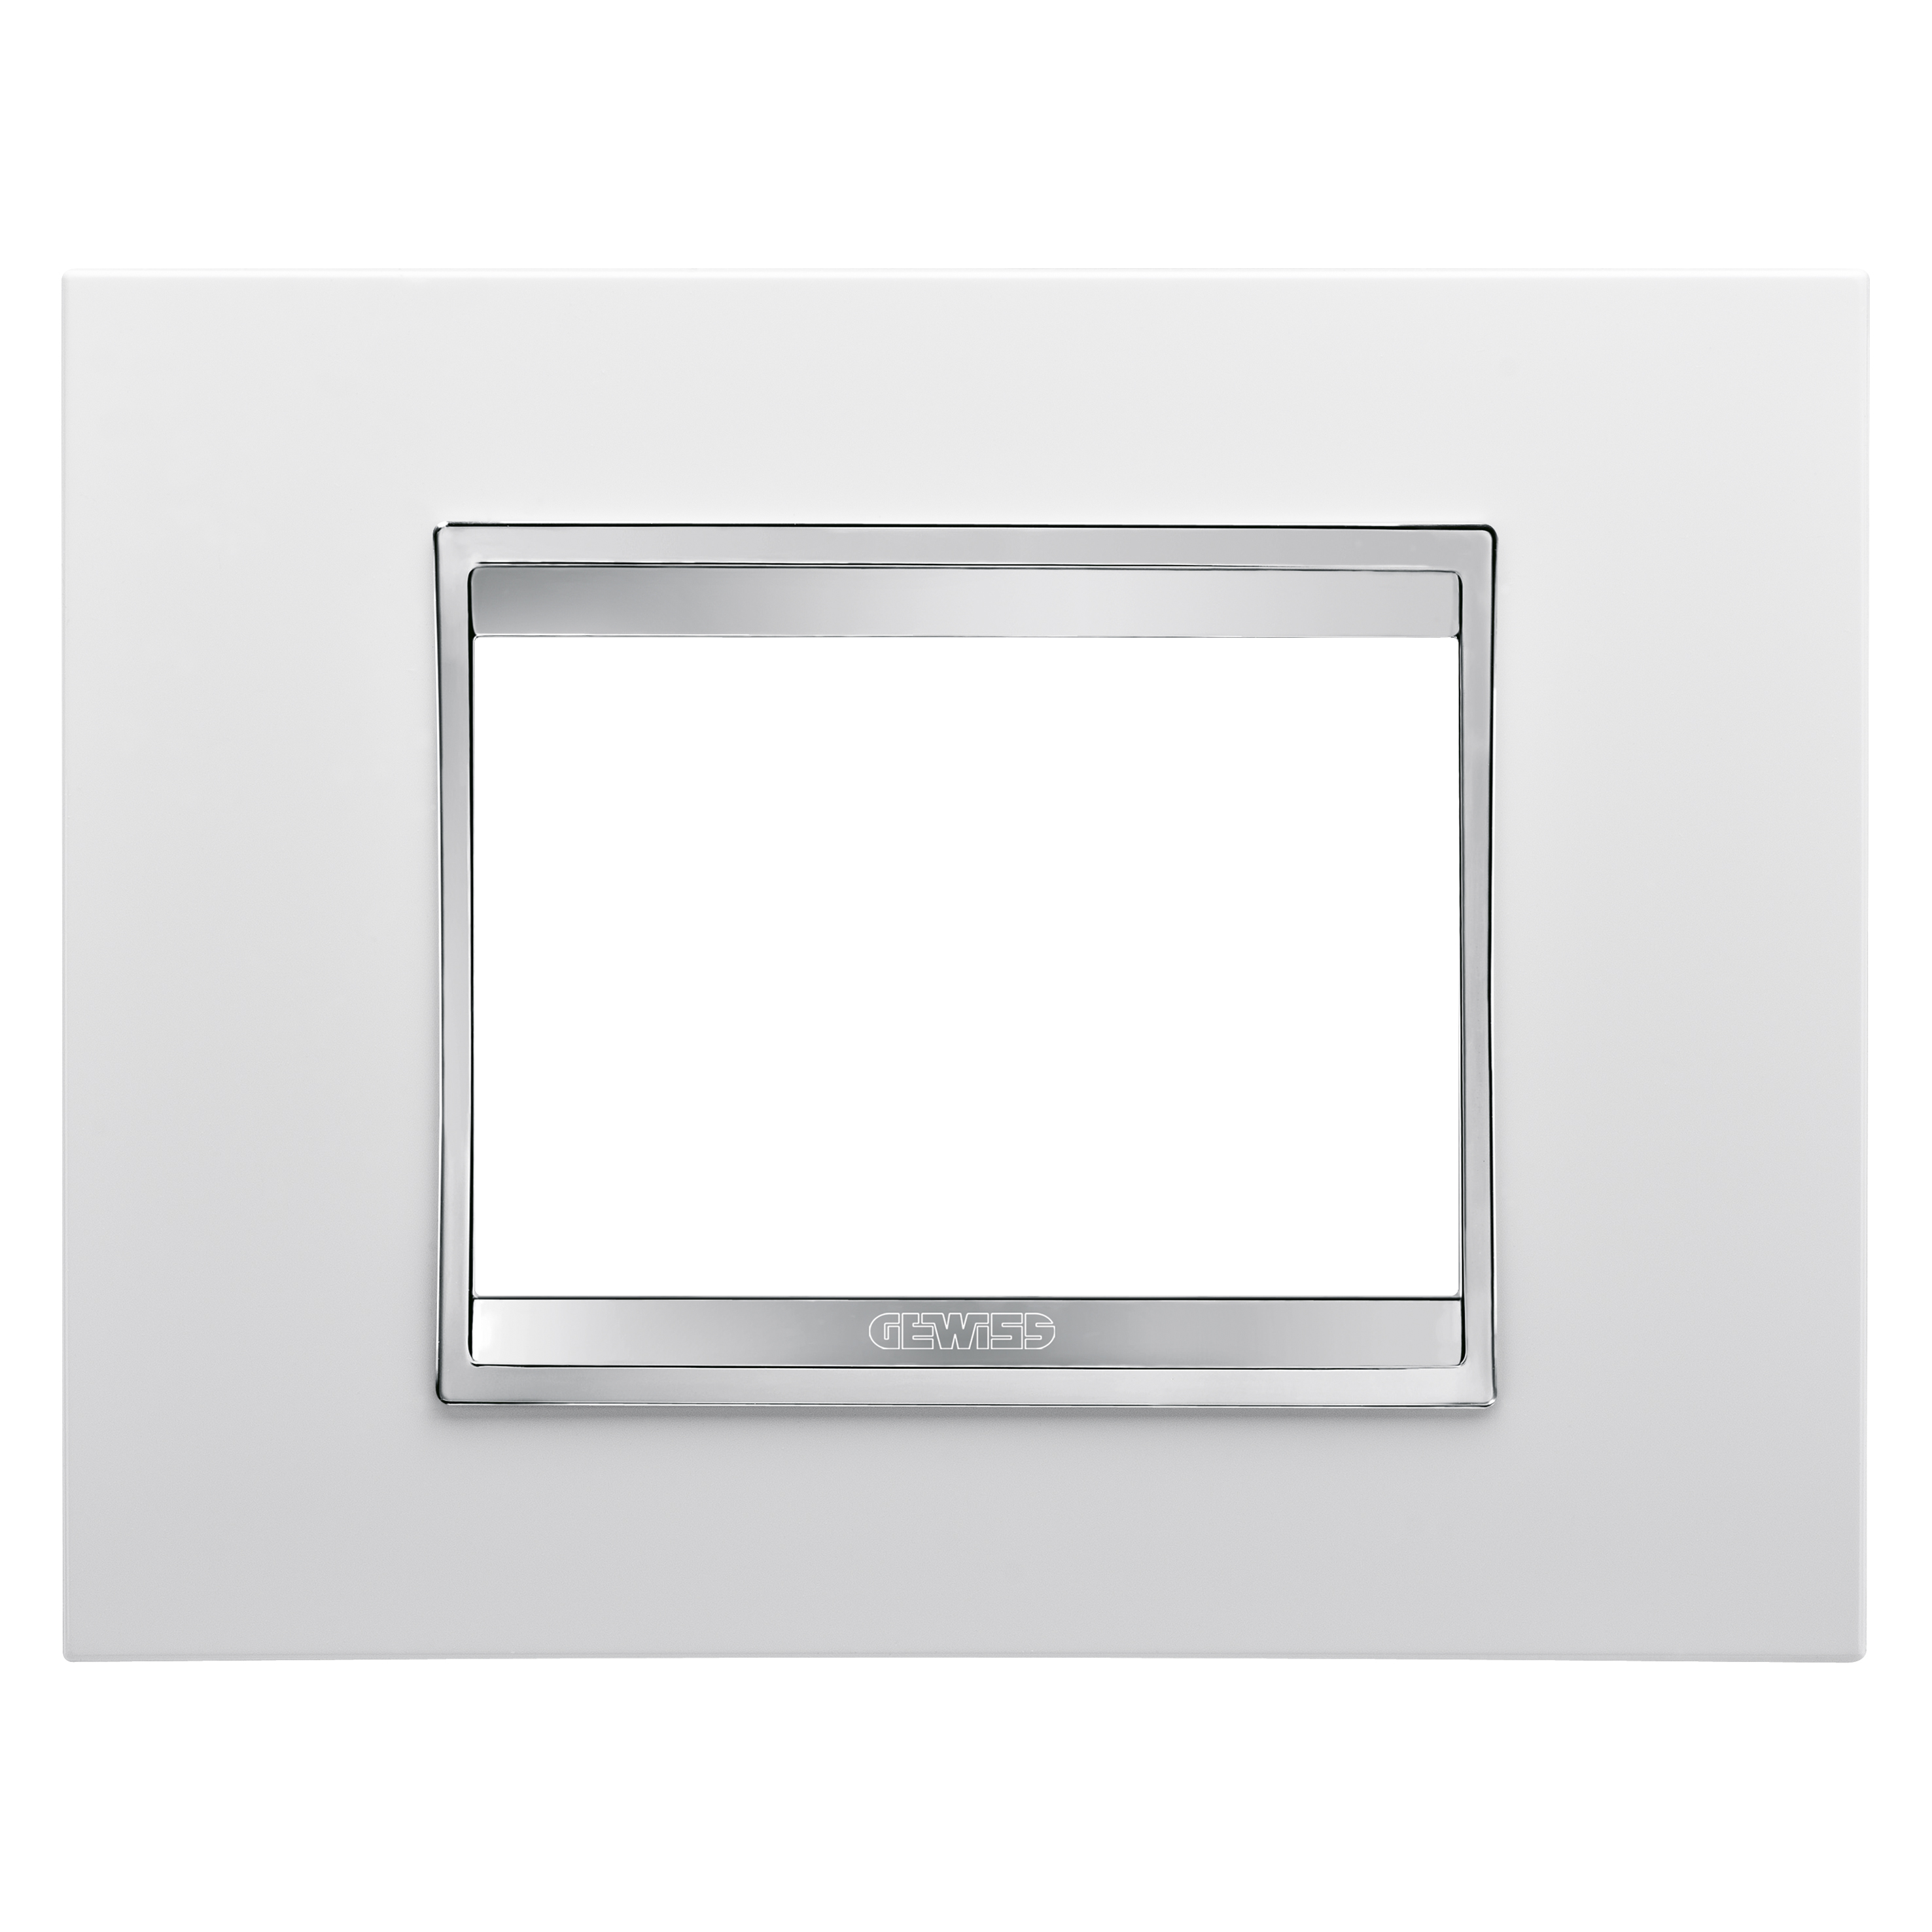 PLACCA LUX 3P BIANCO